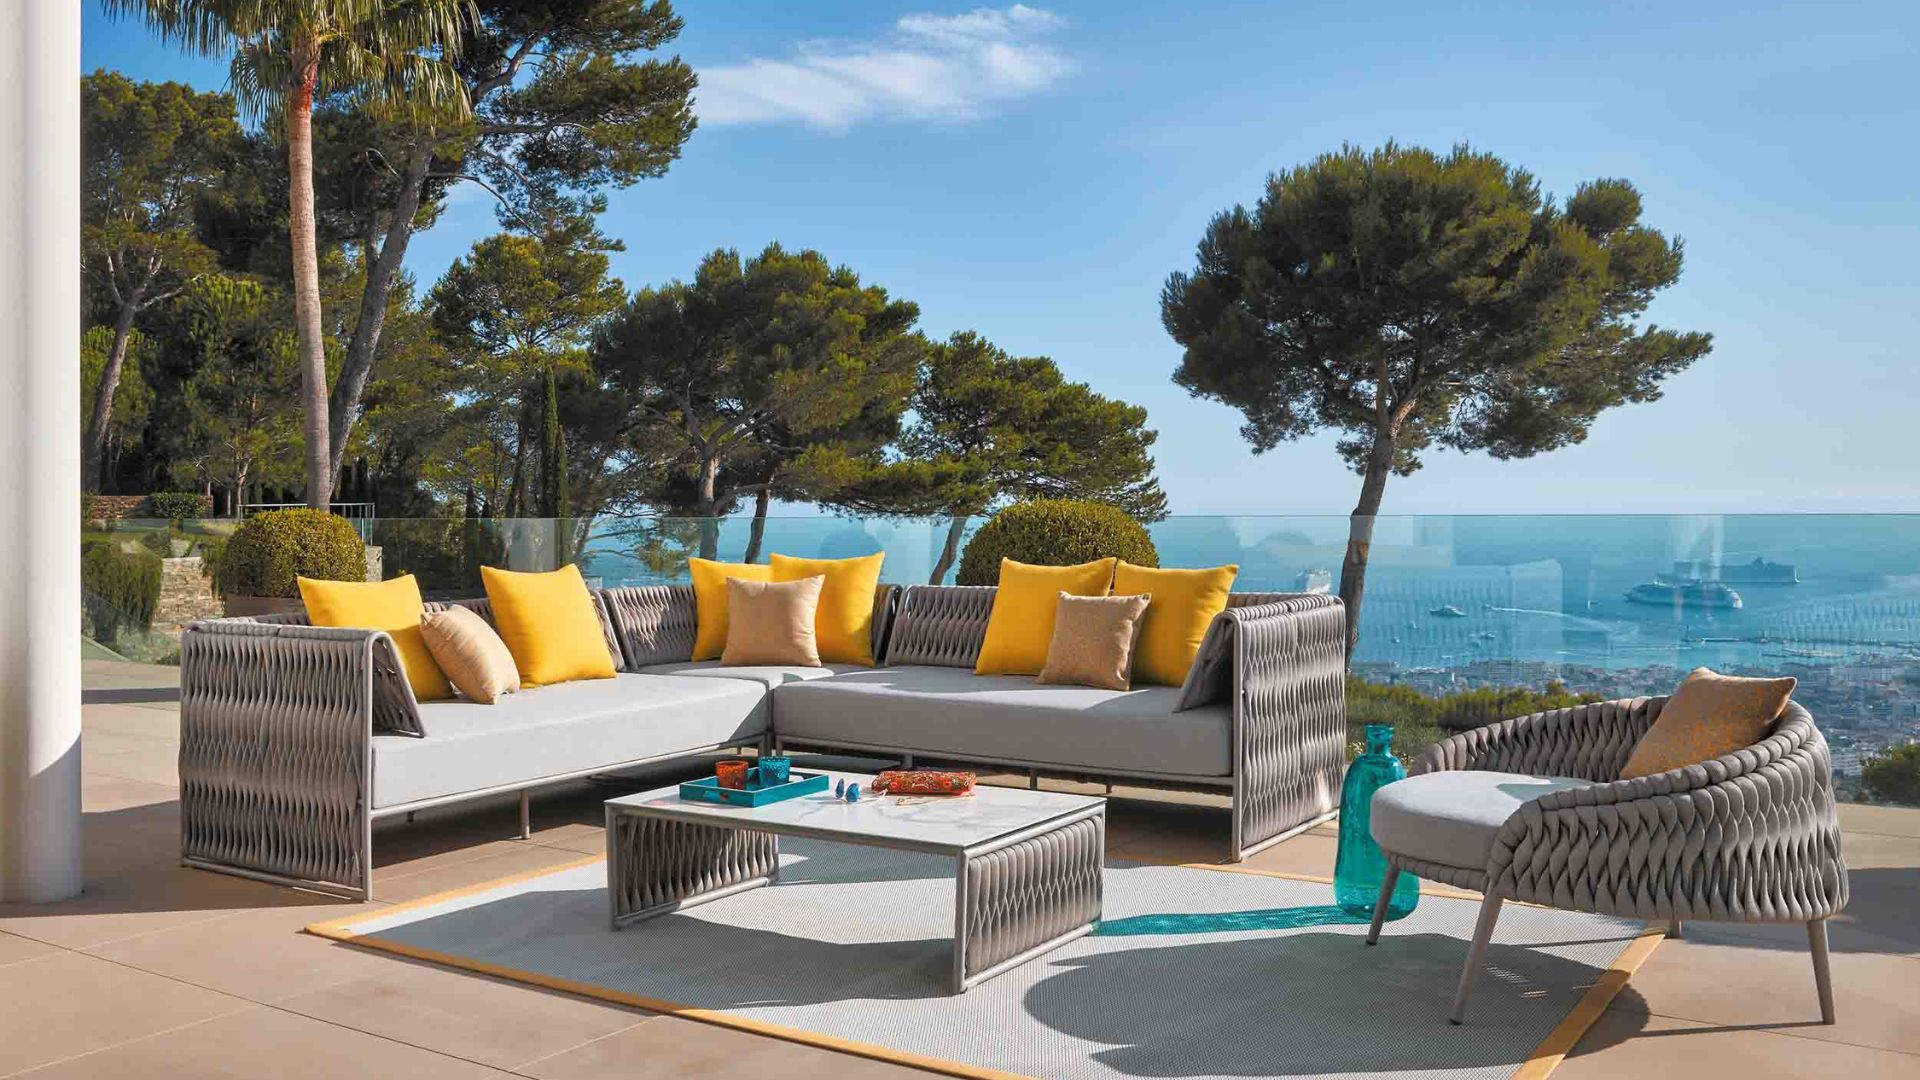 Transform Your Backyard Oasis: Luxury Outdoor Furniture Inspirations